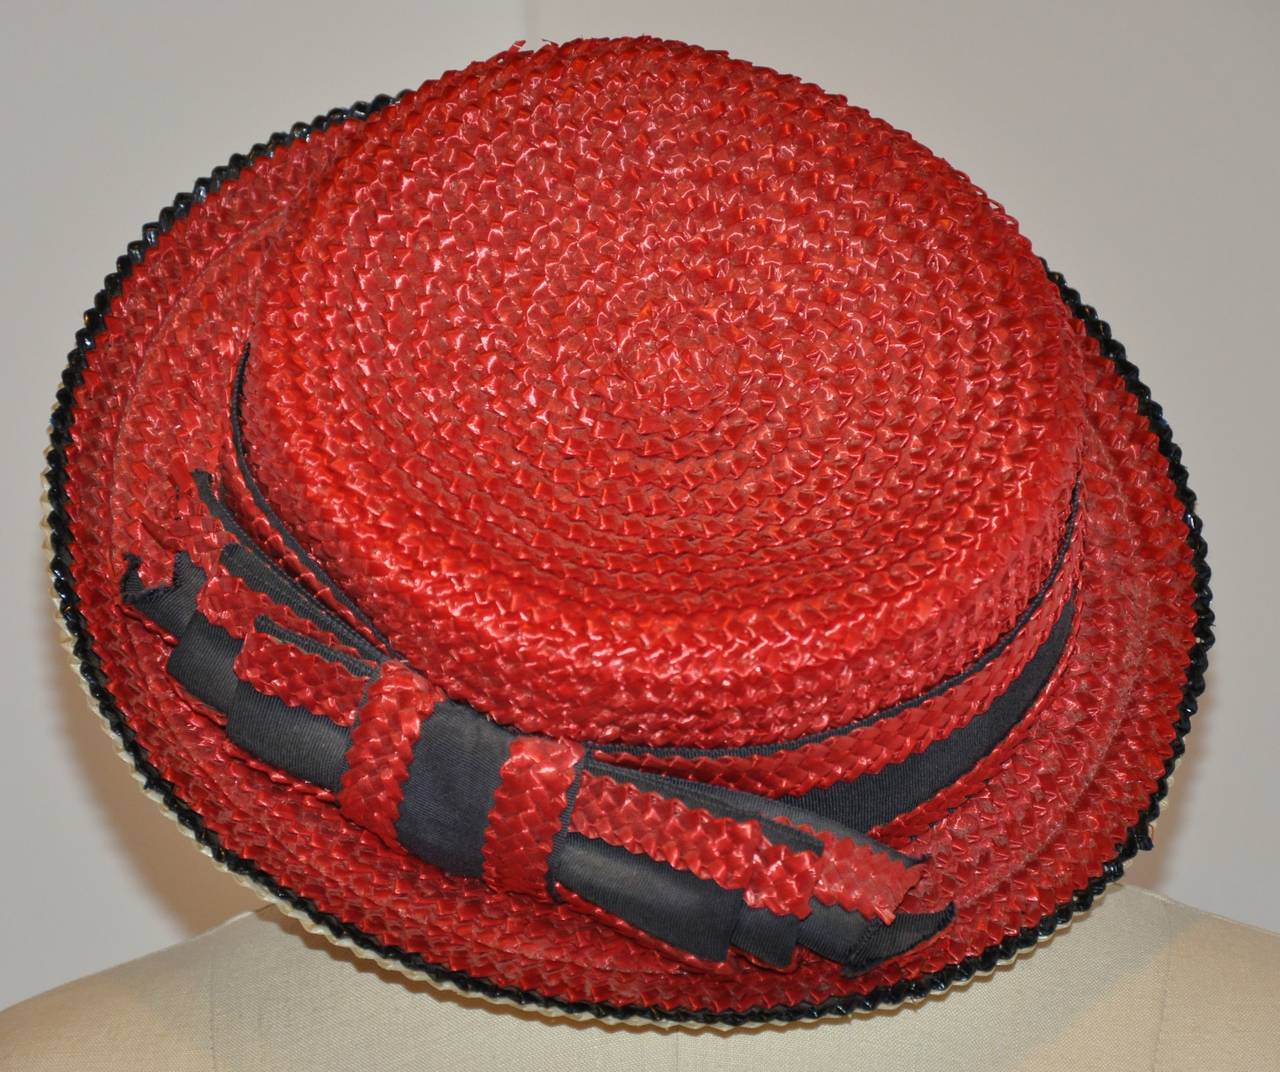 Yves Saint Laurent's combination of red, white and blue straw hat is accented with a large 9